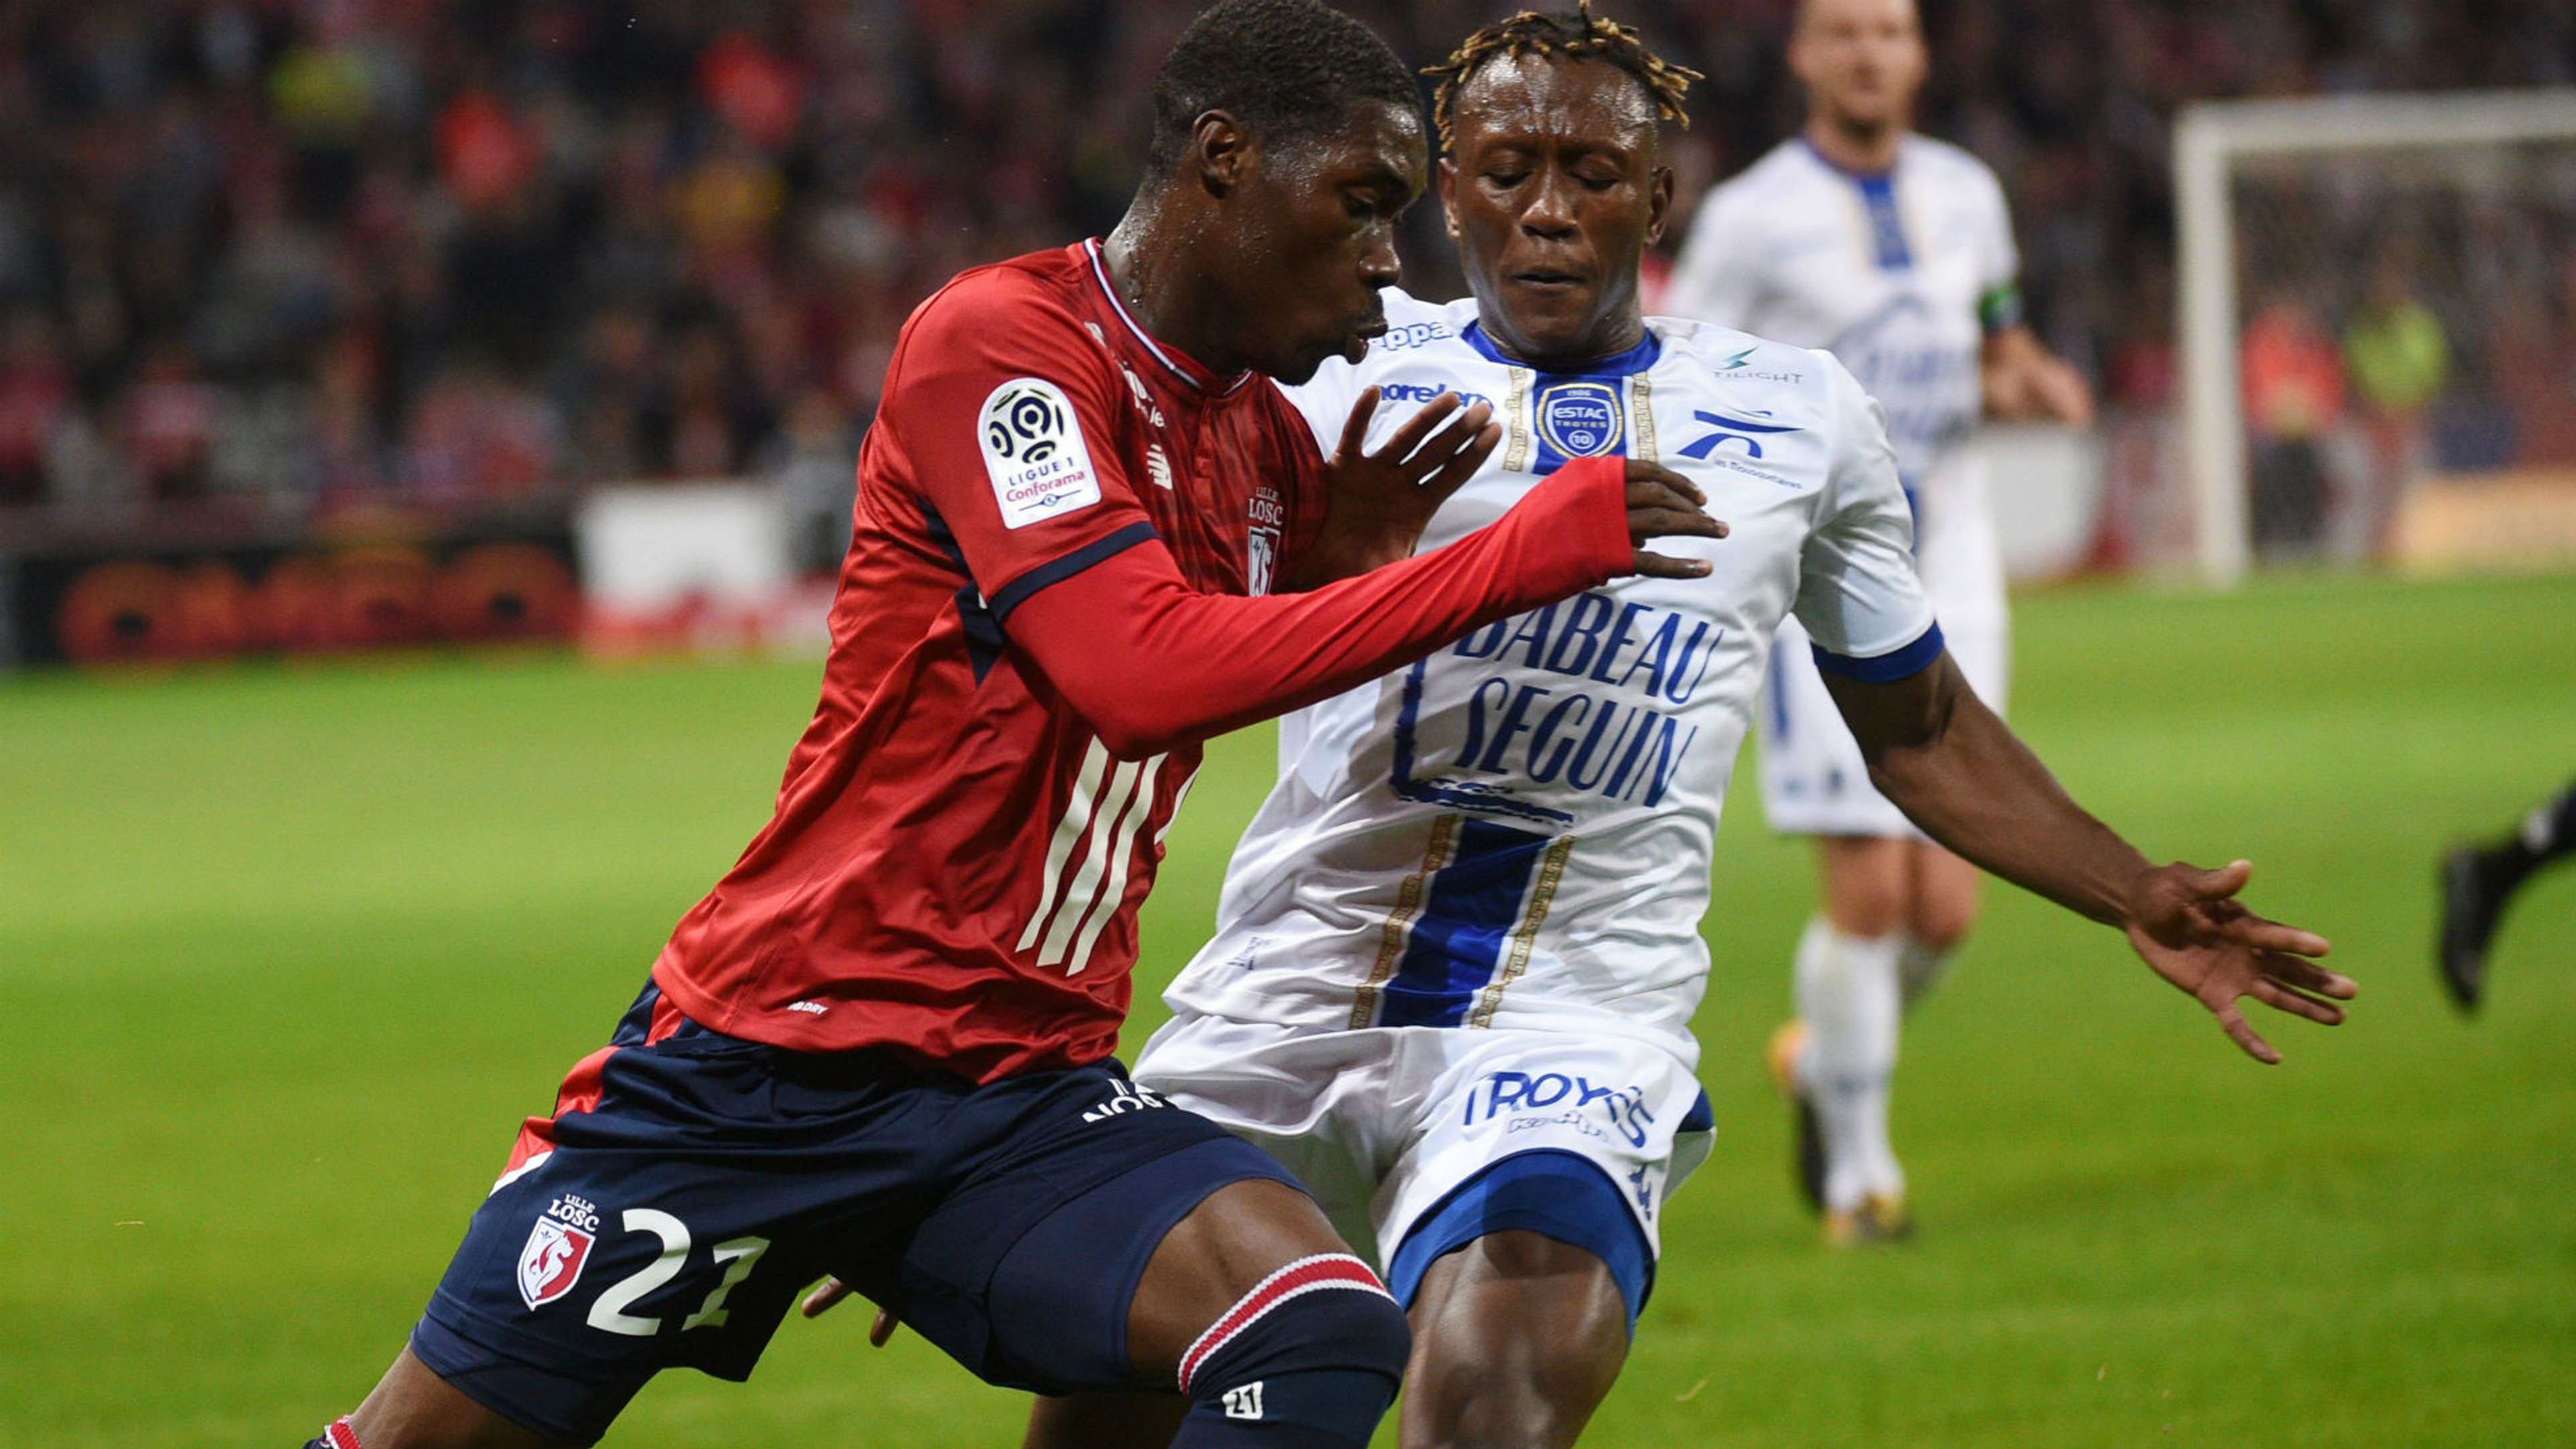 Yves Bissouma Charles Traore Lille Troyes Ligue 1 14102017